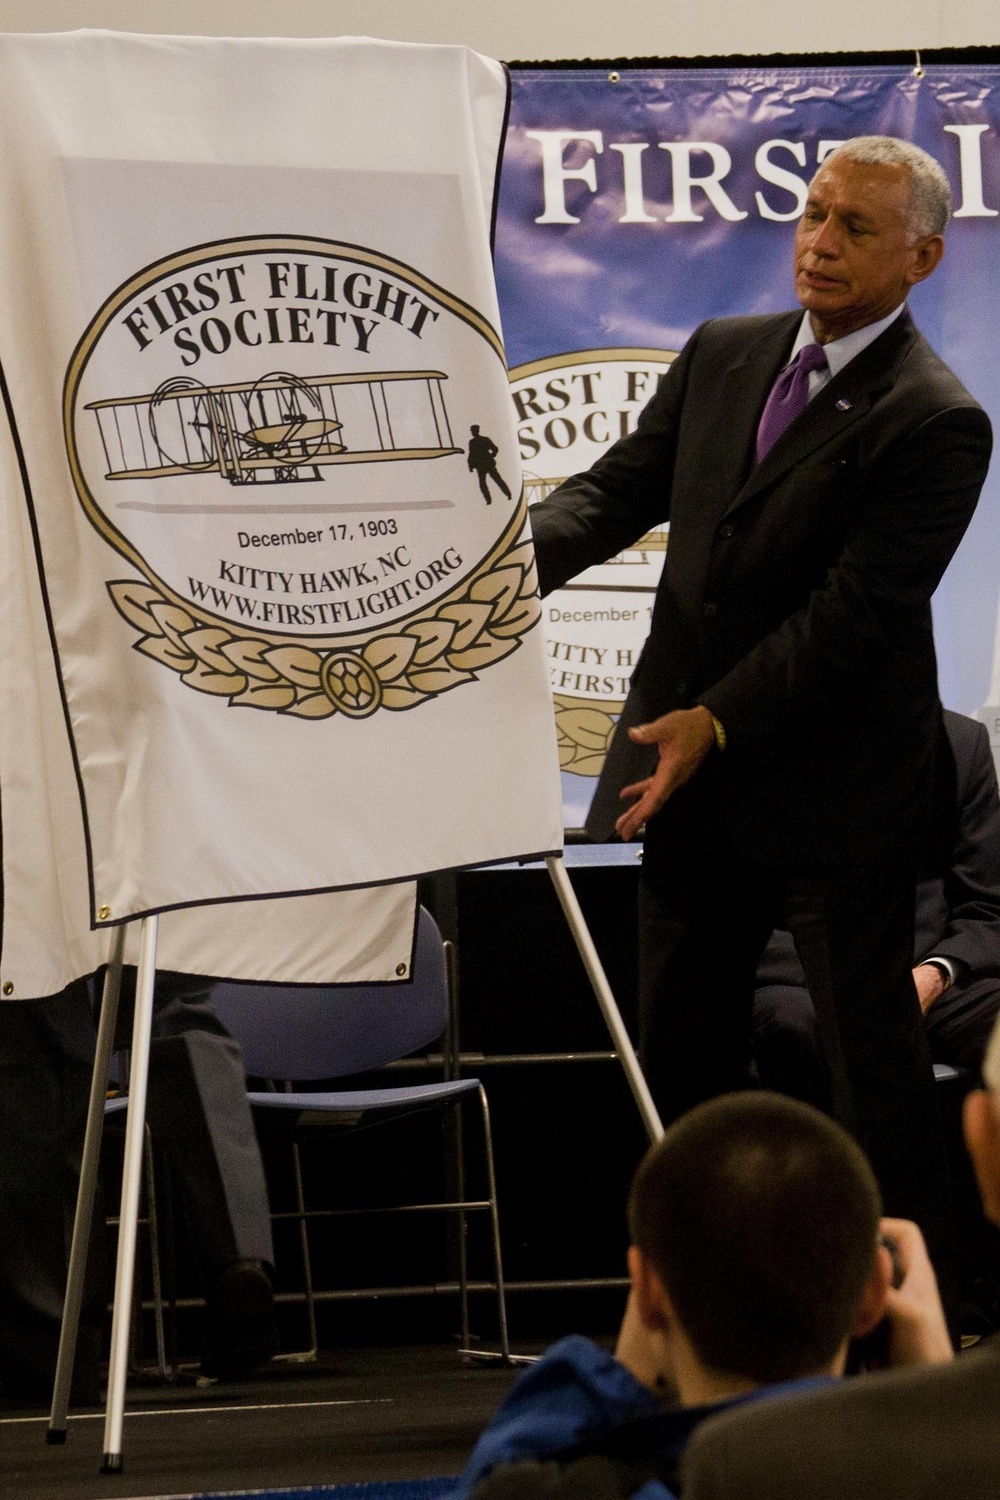 Marine aviation honored at 109th anniversary of first flight